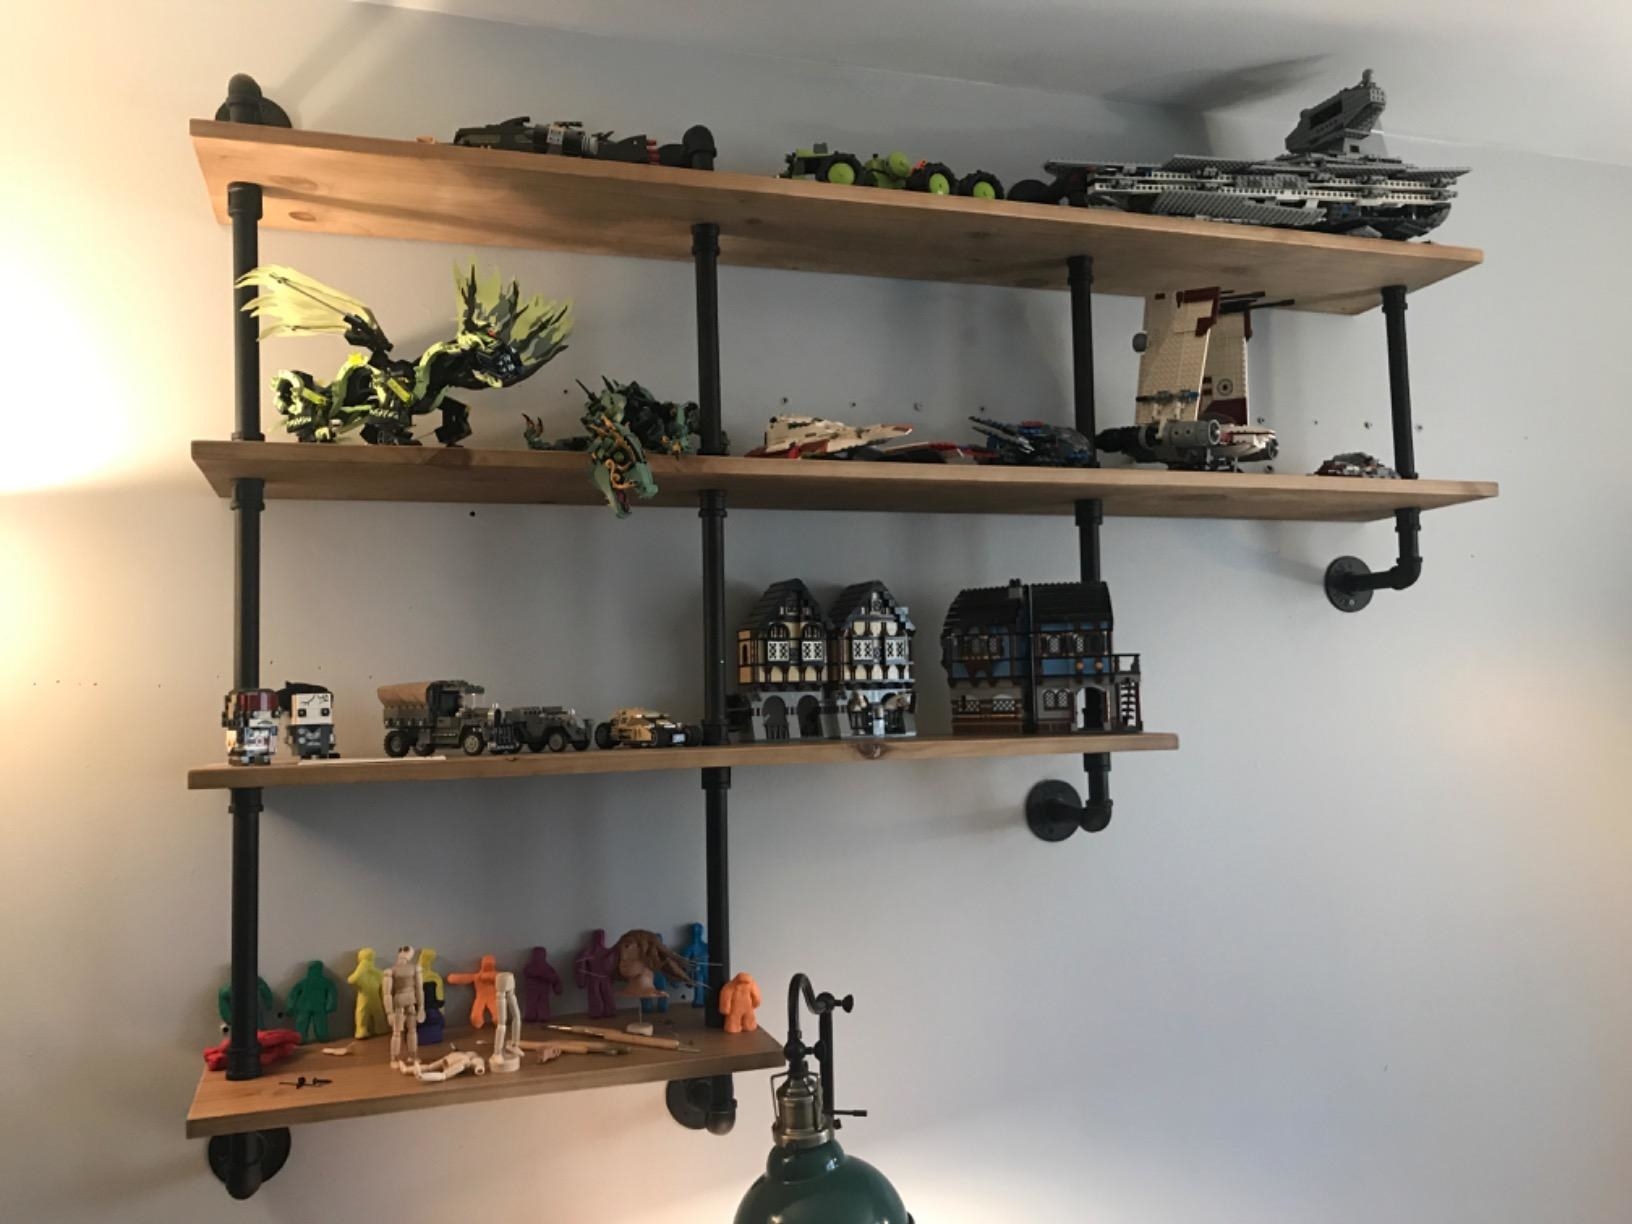 reviewer image of the 4-tiered pipe shelving unit mounted to a wall with LEGO creations on each shelf